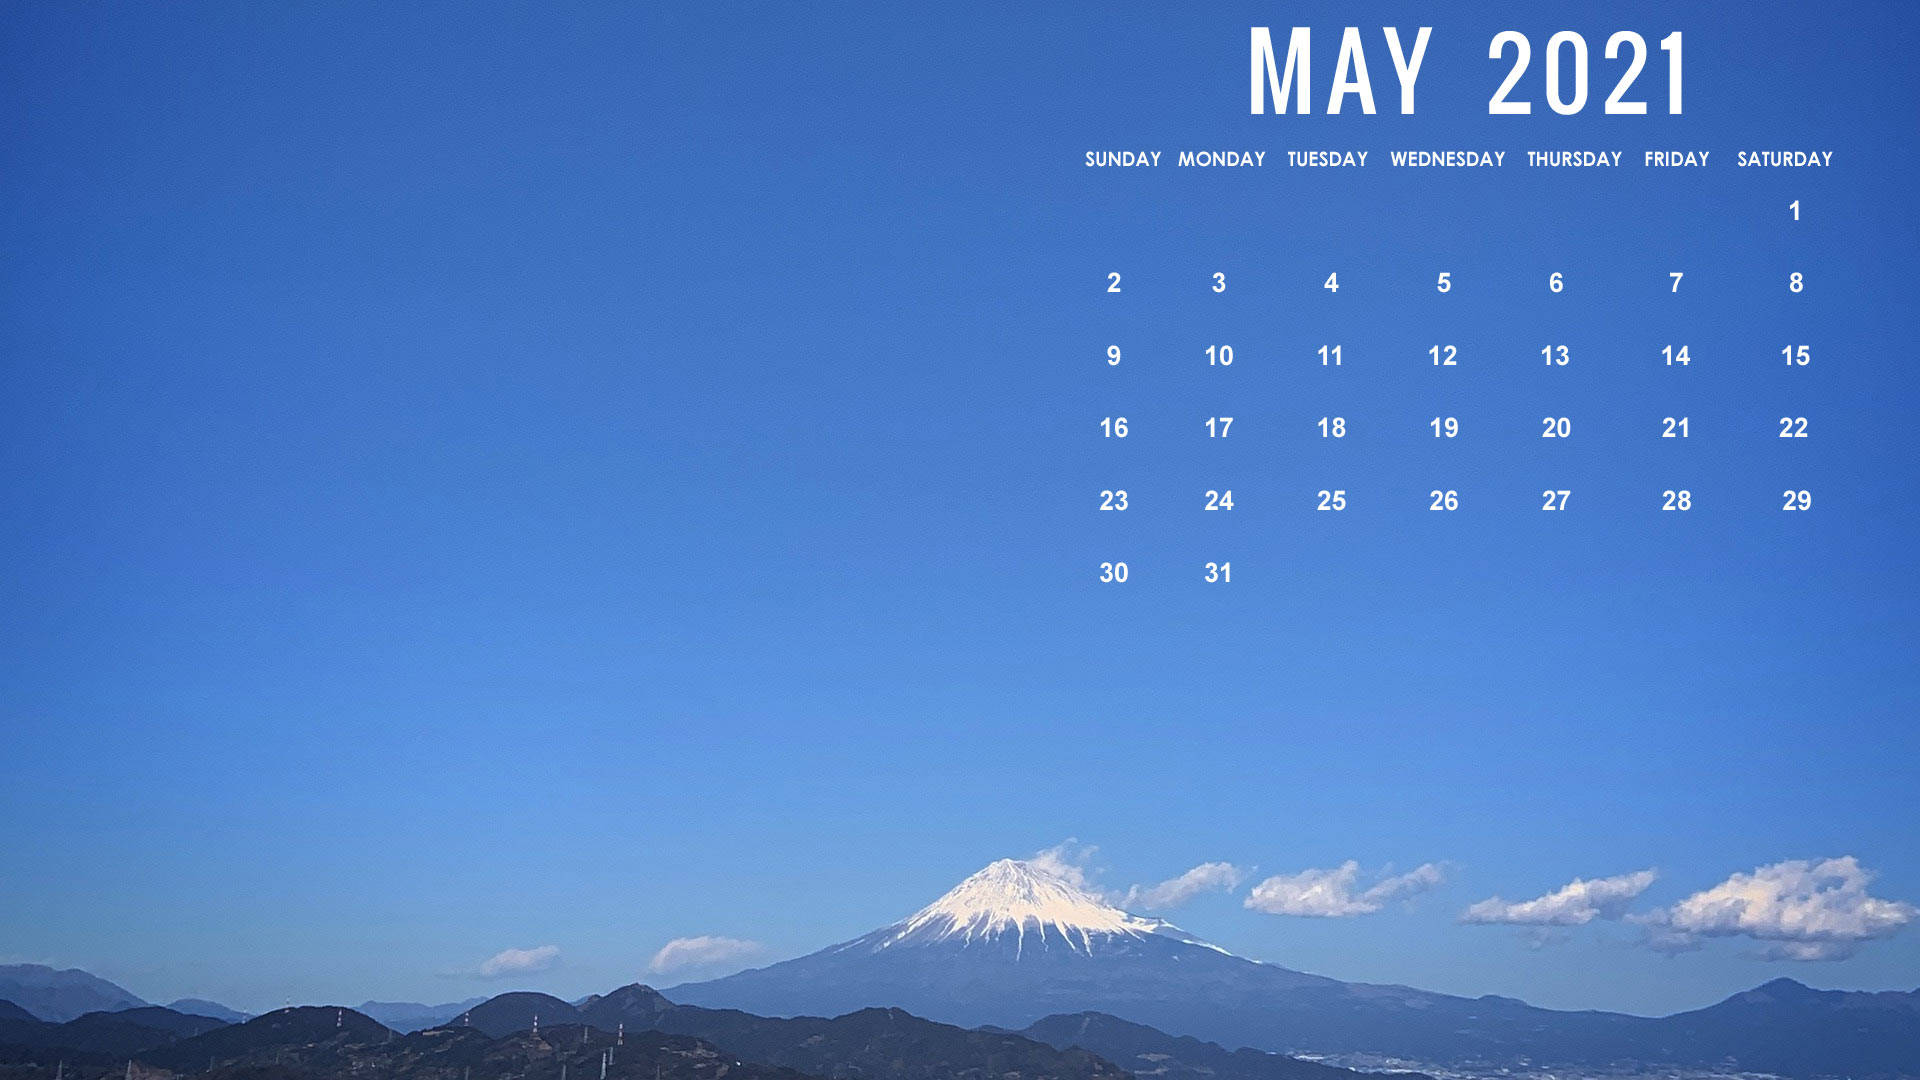 “Welcome may, with Mt.Fuji at its peak!” Wallpaper